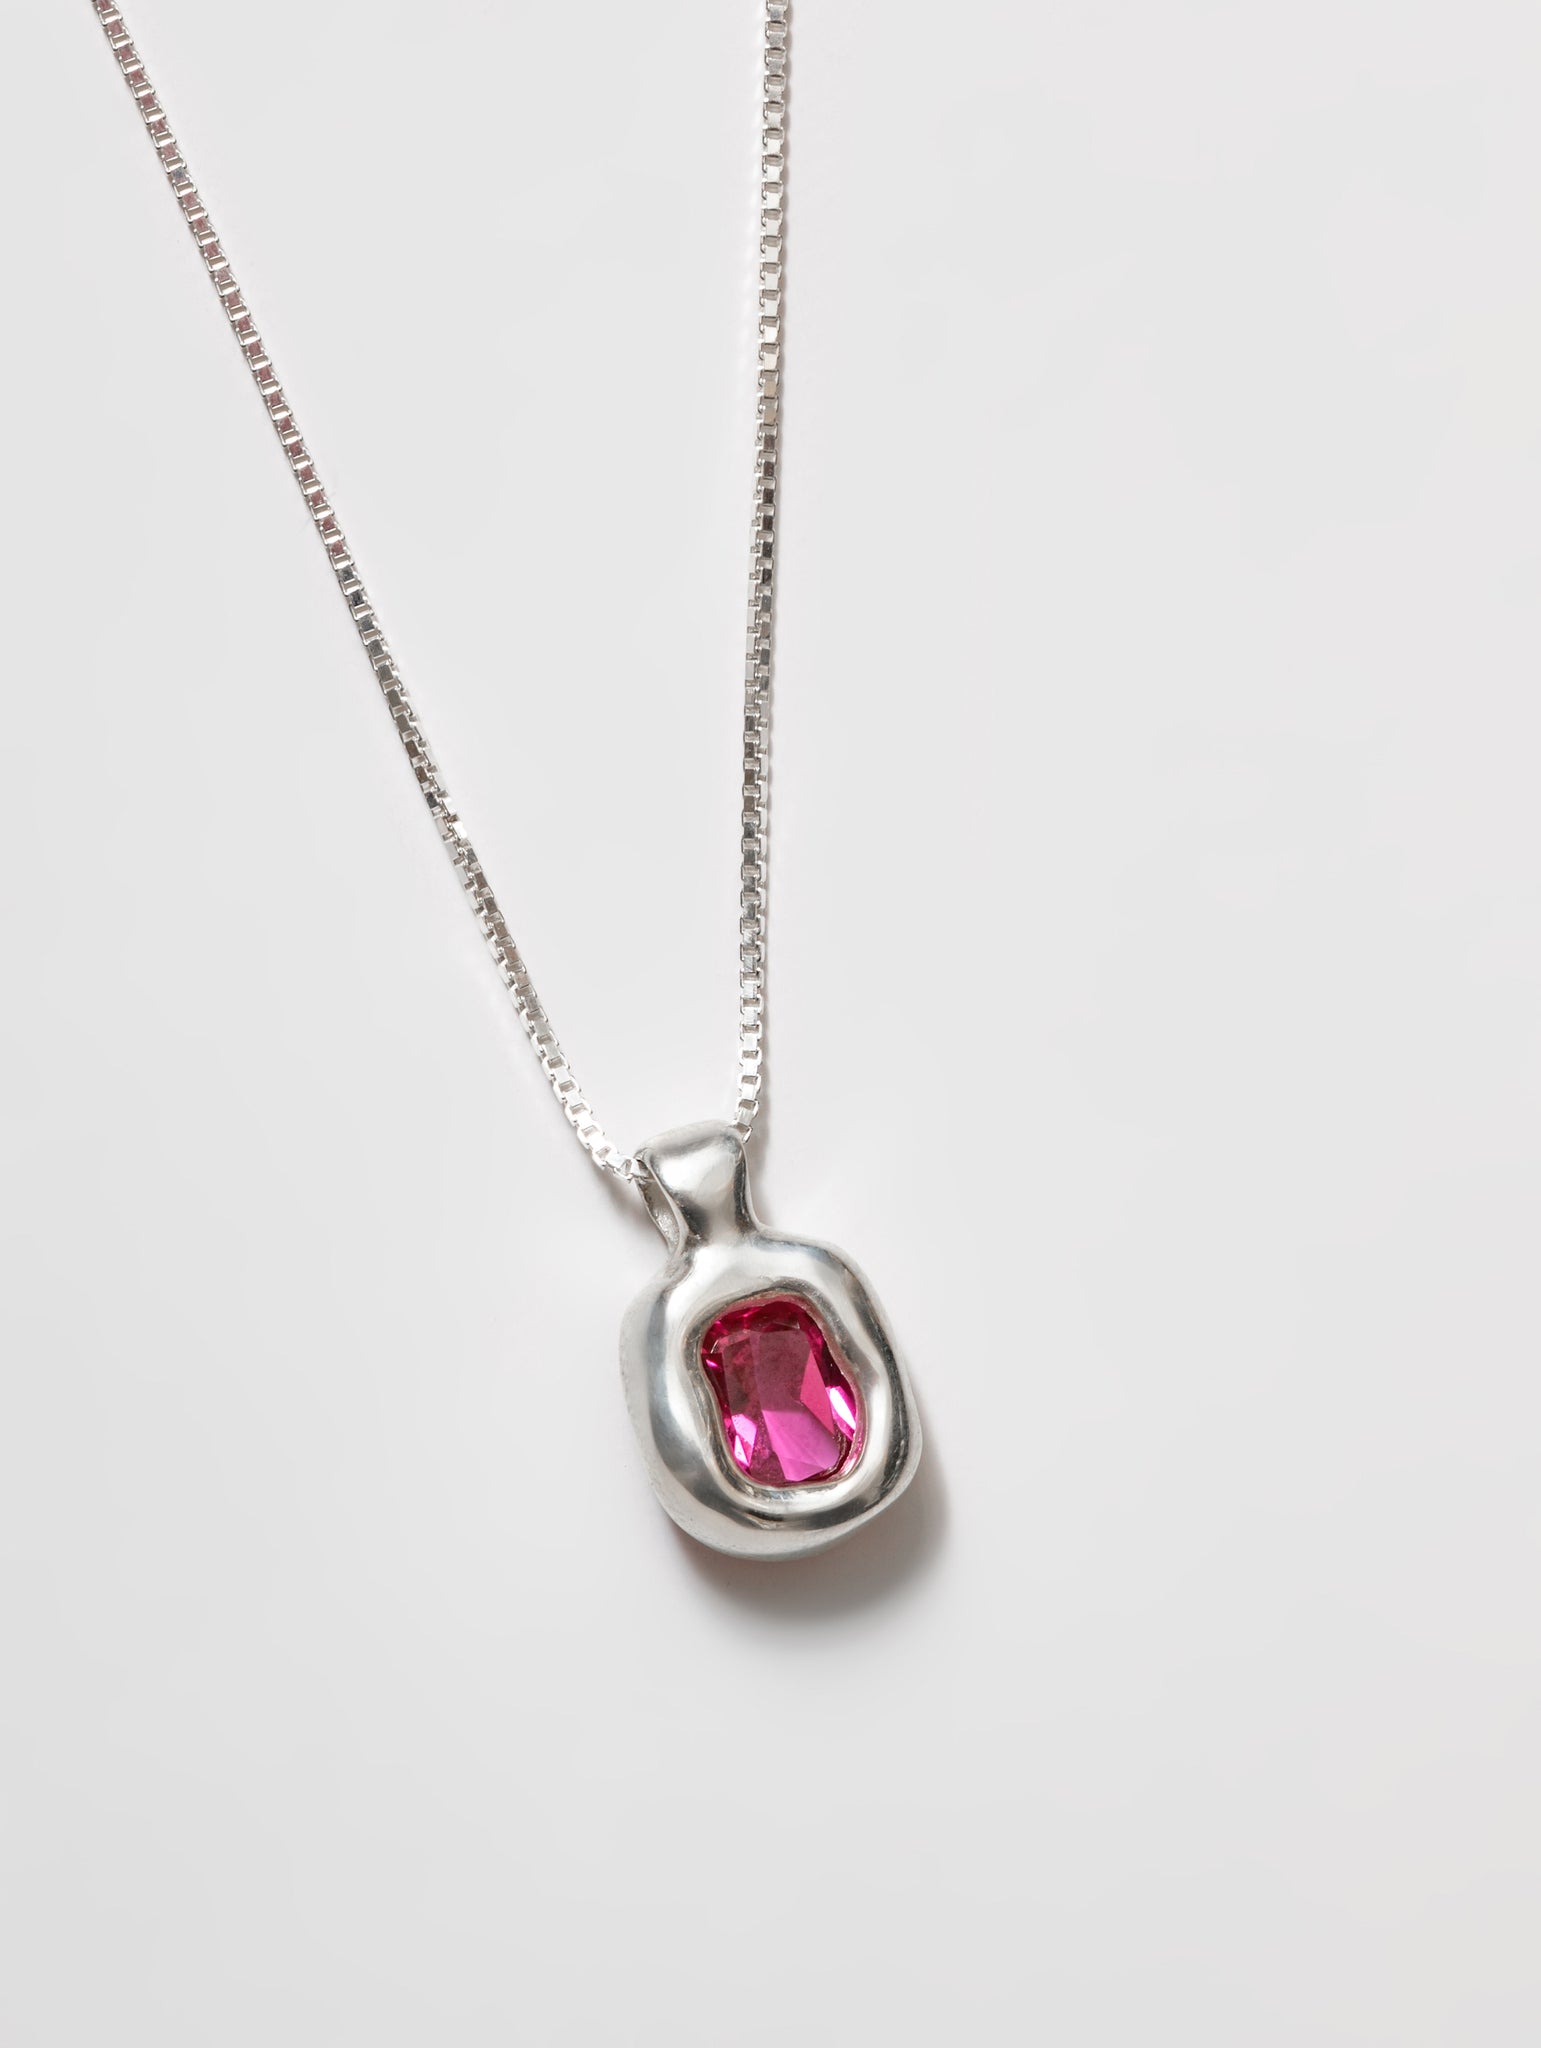 Freya Necklace in Pink and Sterling Silver